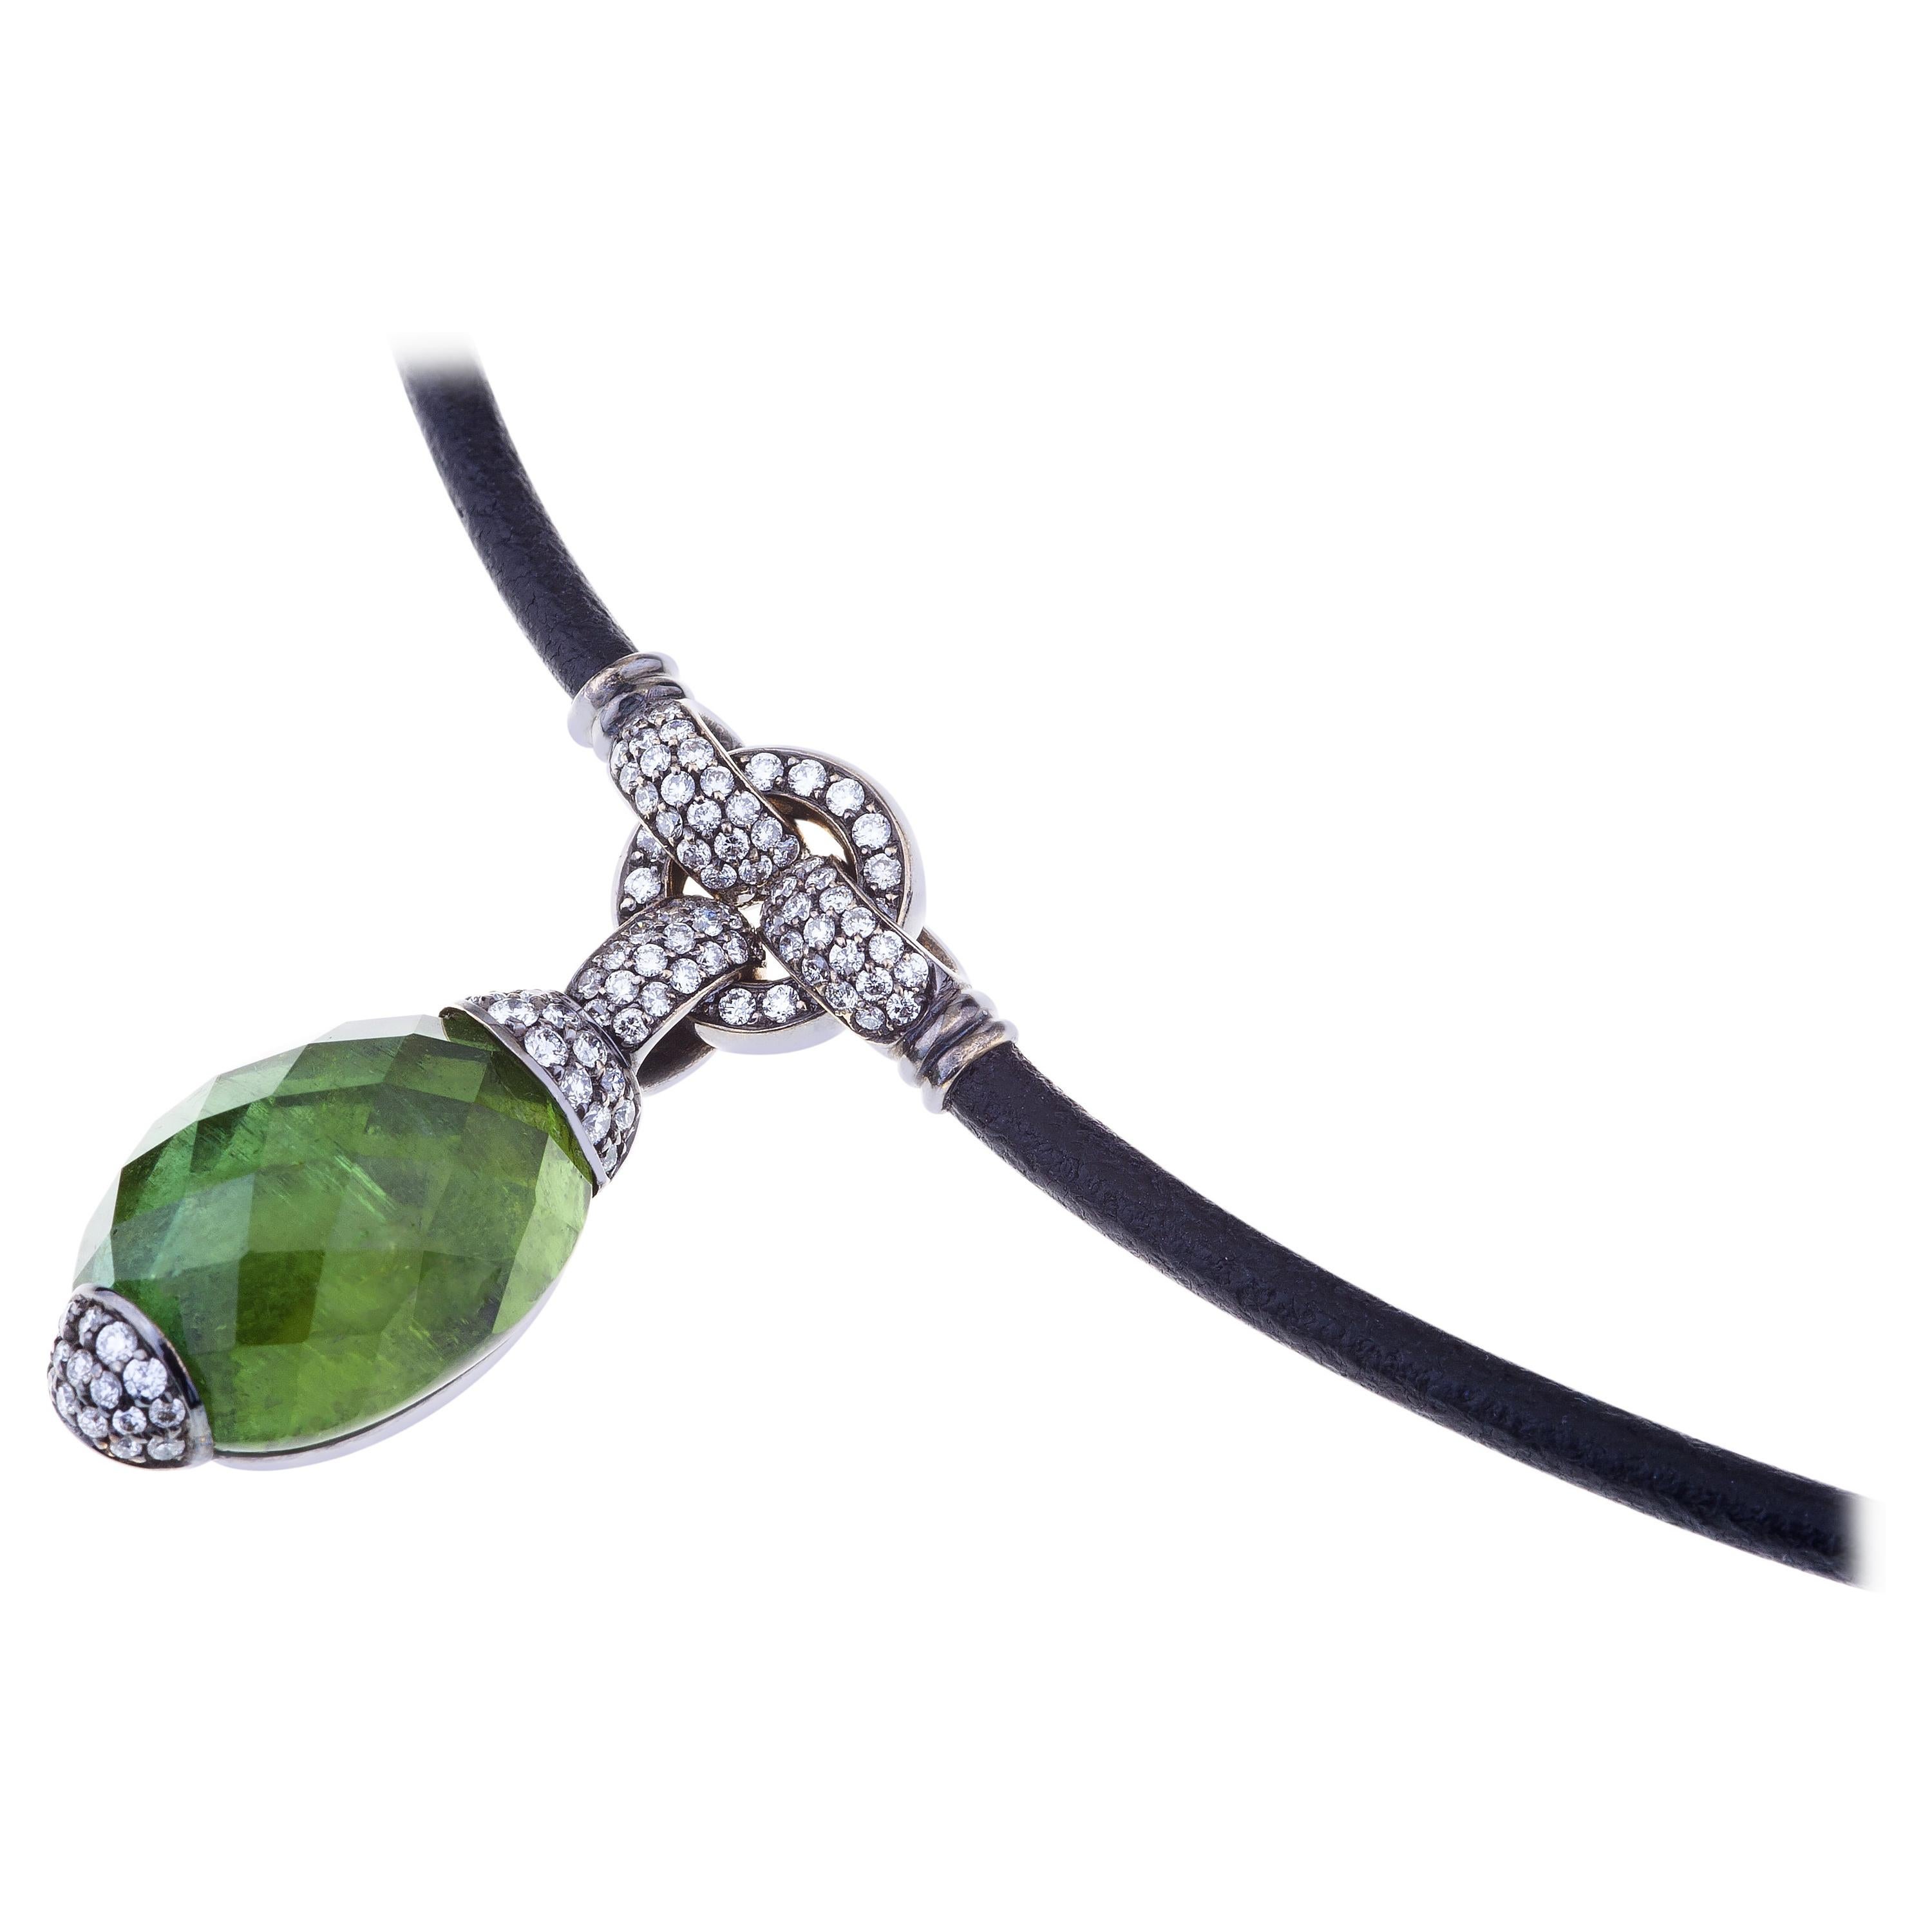 Embrace Collection by Angeletti. Pendant with Faceted Green Tourmaline, Diamonds and Gold.
Stone From an Exceptional Tourmaline of around ct. 200 Cut and Faceted by Expert Hands. Wholly Natural, No treatment at all. The Green Tourmaline is ct.